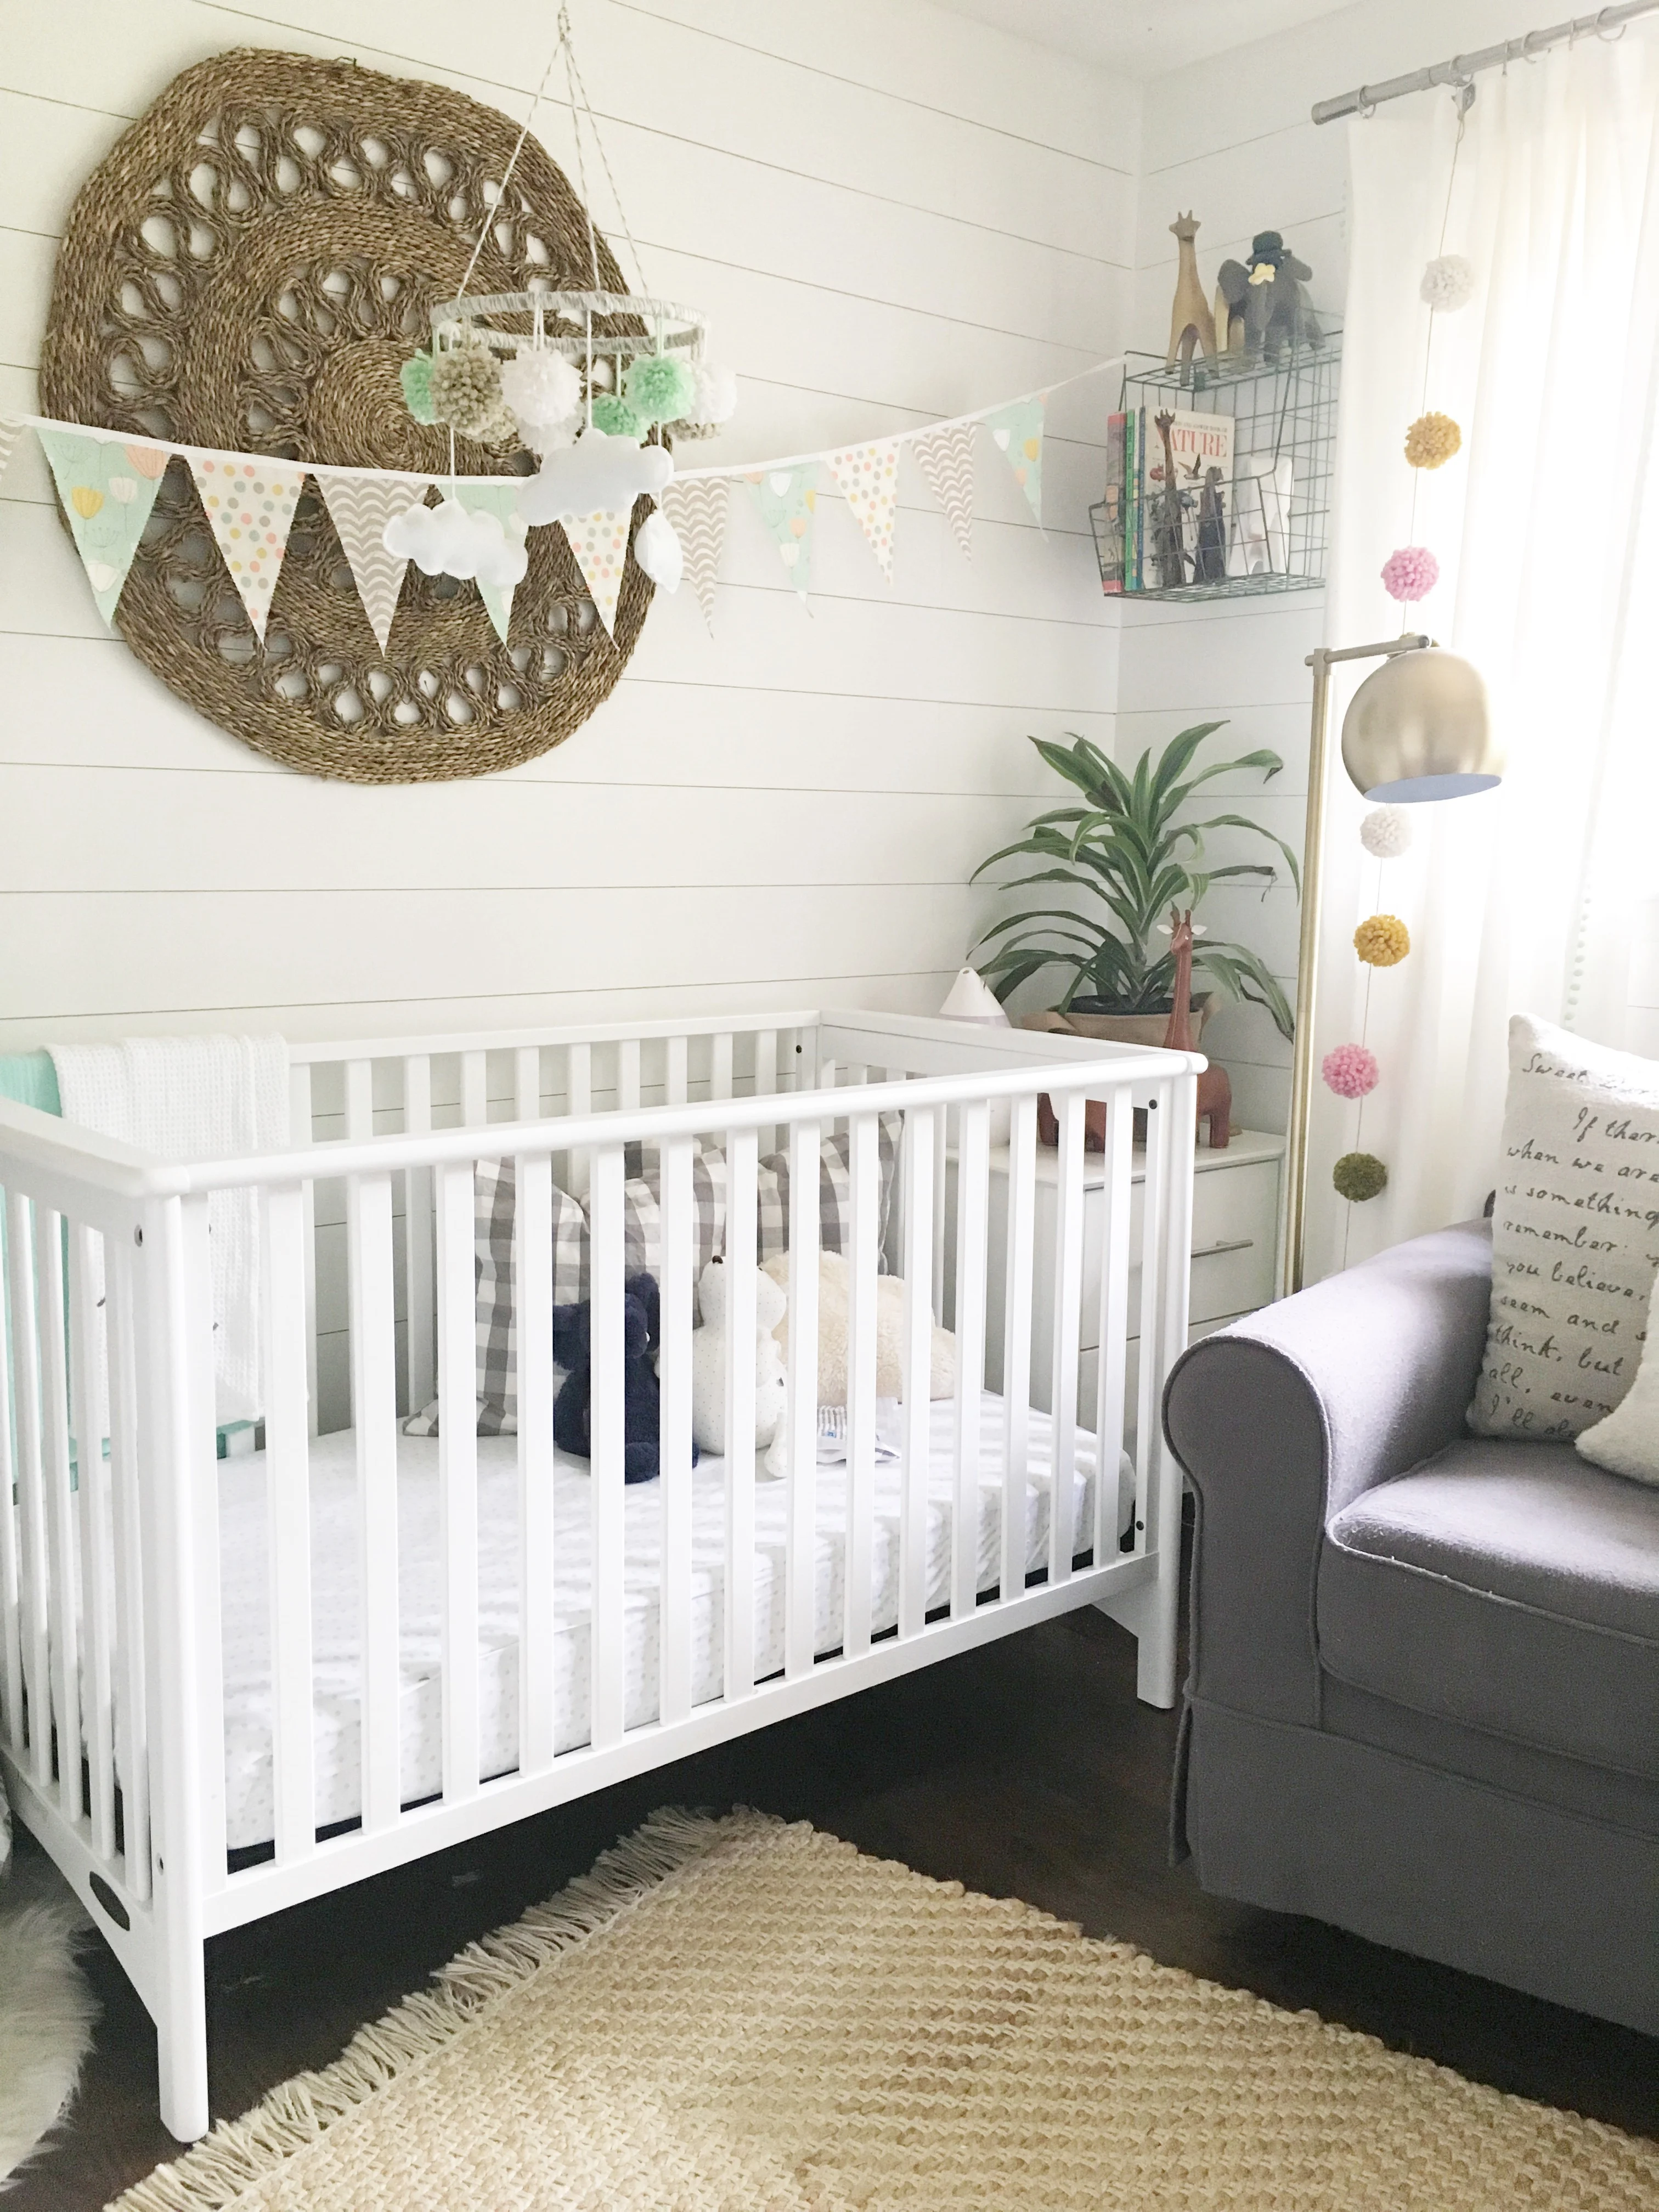 Whimsical Mint and Gray Nursery Gender Neutral Nursery with Mint Accents - Project Nursery